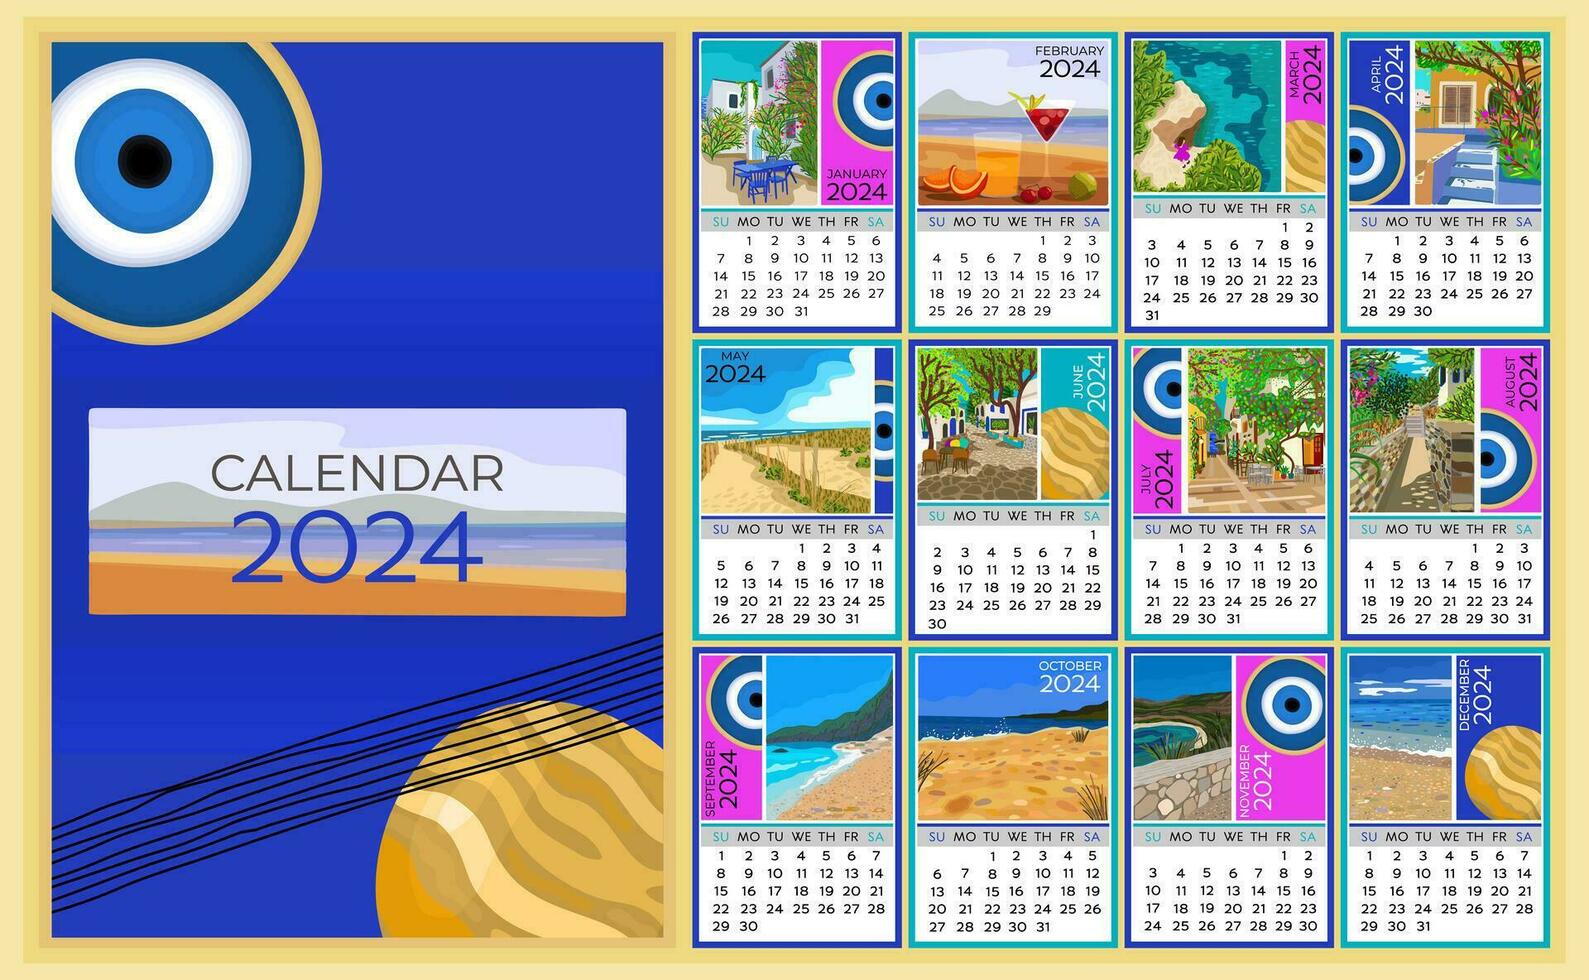 Calendar 2024. Colorful monthly calendar with various southern landscapes. Week starts on Sunday. vector